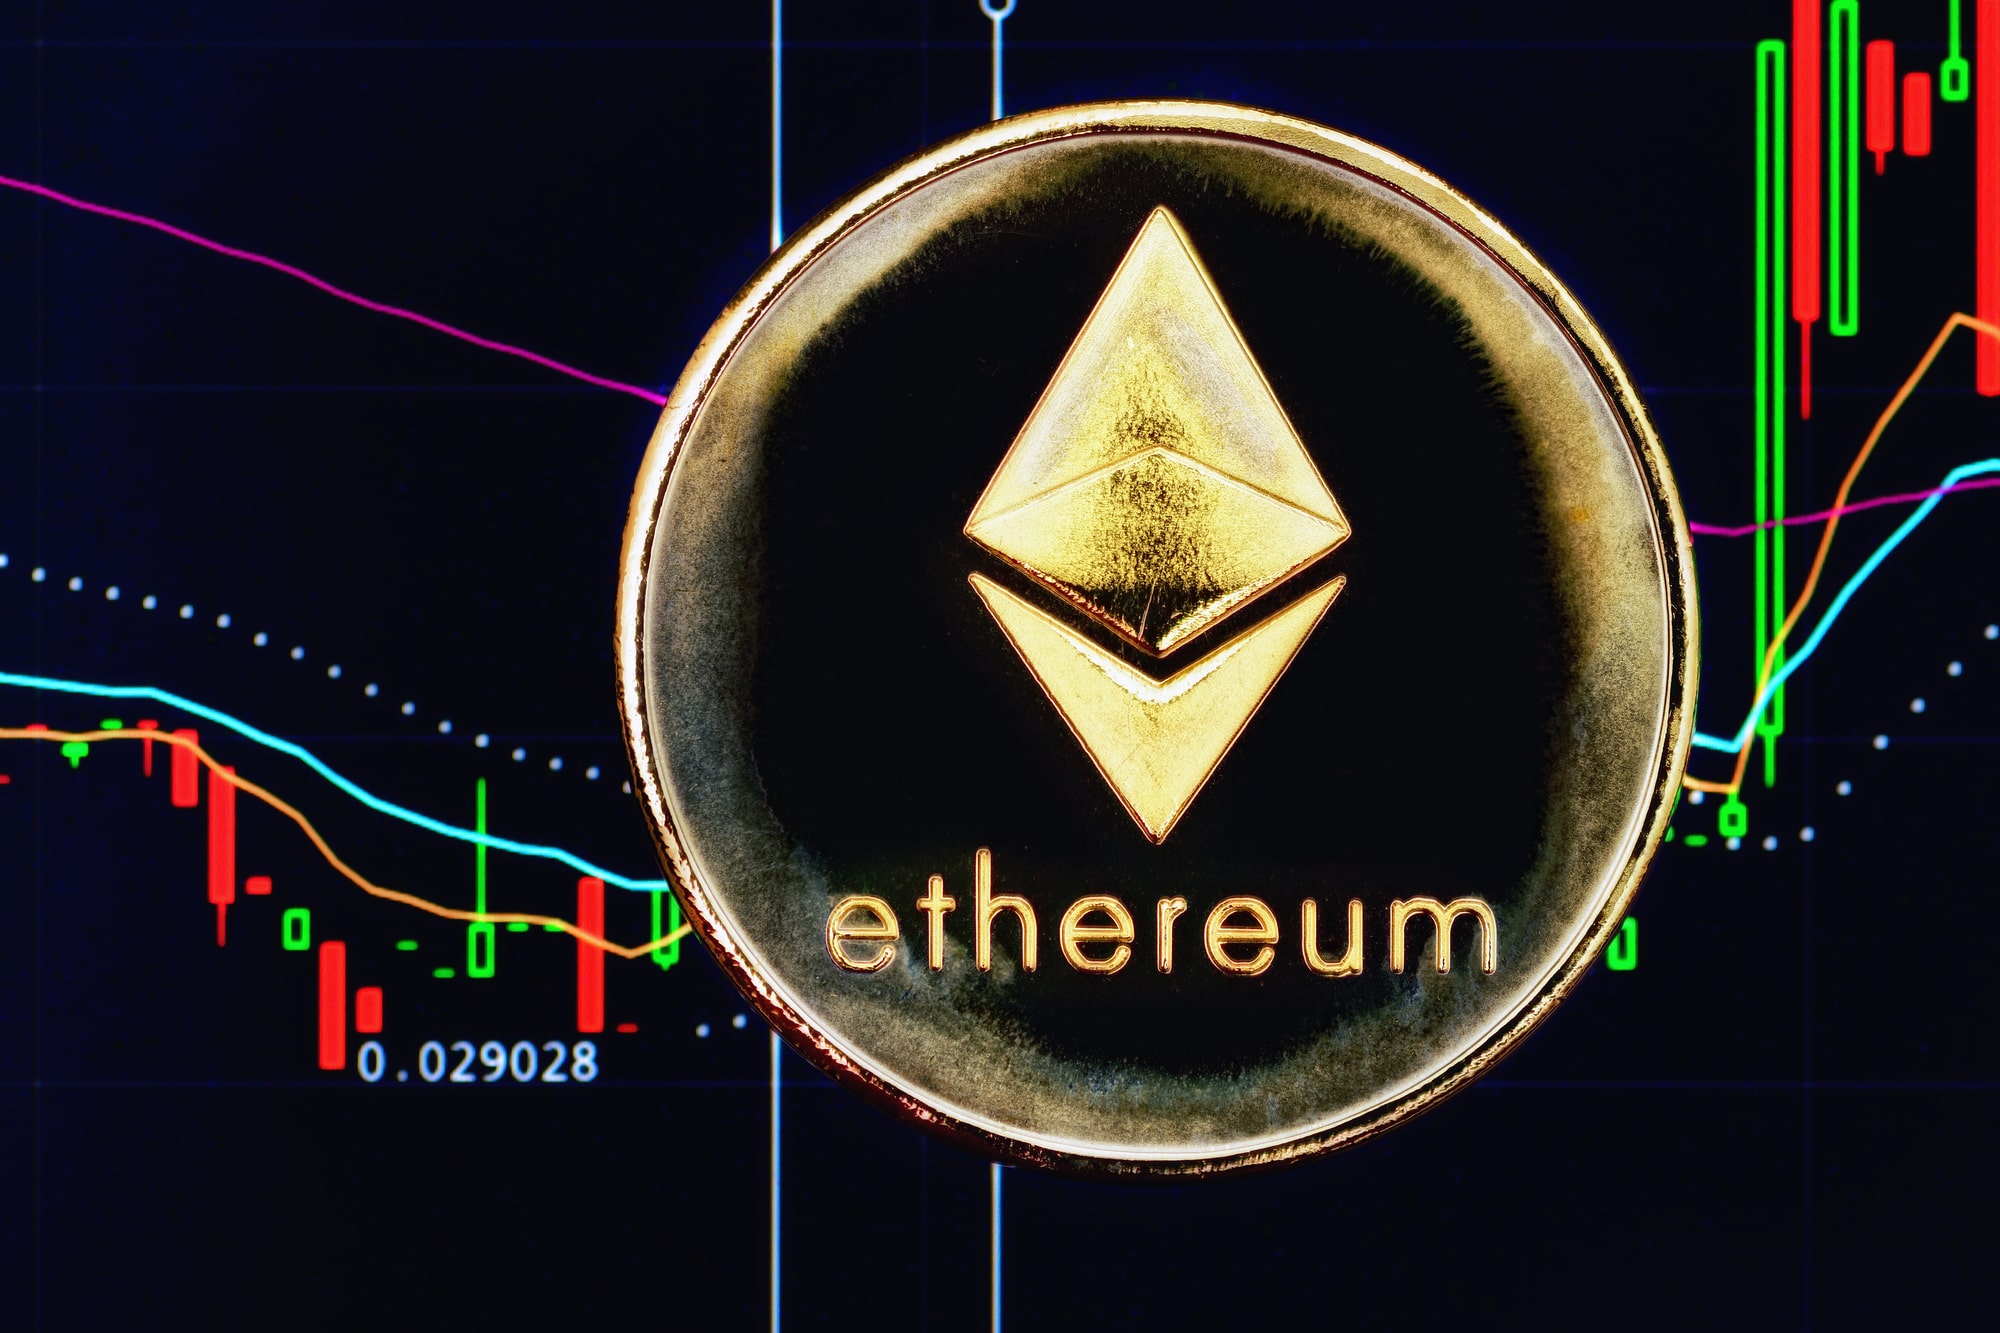 Ethereum surges after major “London” upgrade, which will make ETC mining obsolete soon